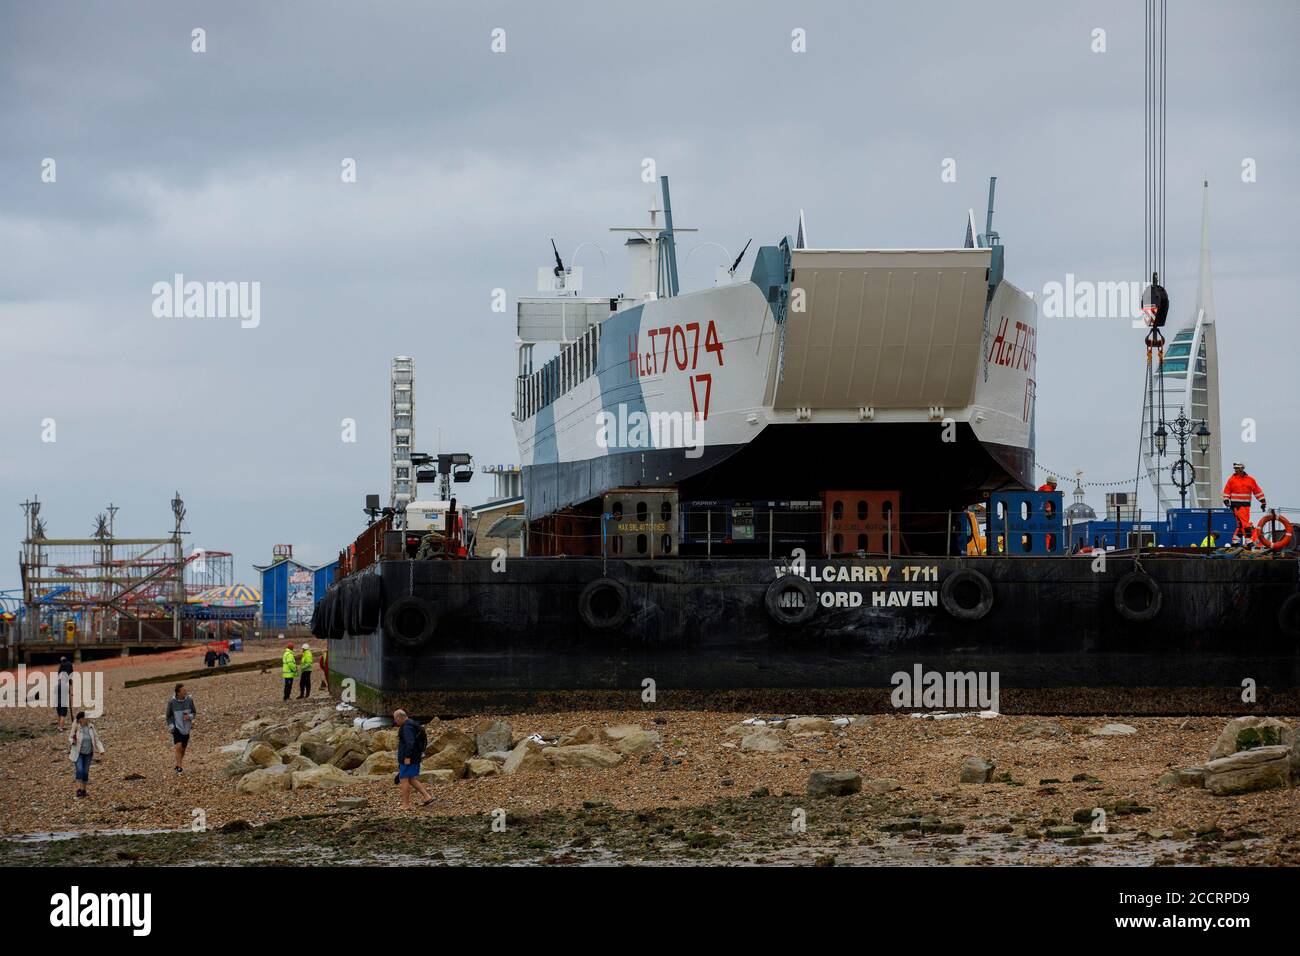 Portsmouth, Hampshire, UK. 24th Aug 2020. Bystanders photograph the LCT 7074, the last surviving amphibious landing craft tank, before it is moved to the D-Day Museum in Portsmouth, Monday August 24, 2020.  The craft which originally carried tanks and soldiers to Normandy, was floated by barge from the National Museum of the Royal Navy, where it was being restored, to the Promenade in Southsea, where a crane built a bridge to the barge, so it could be driven to its new home at the D-Day Museum.    Credit: Luke MacGregor/Alamy Live News Stock Photo